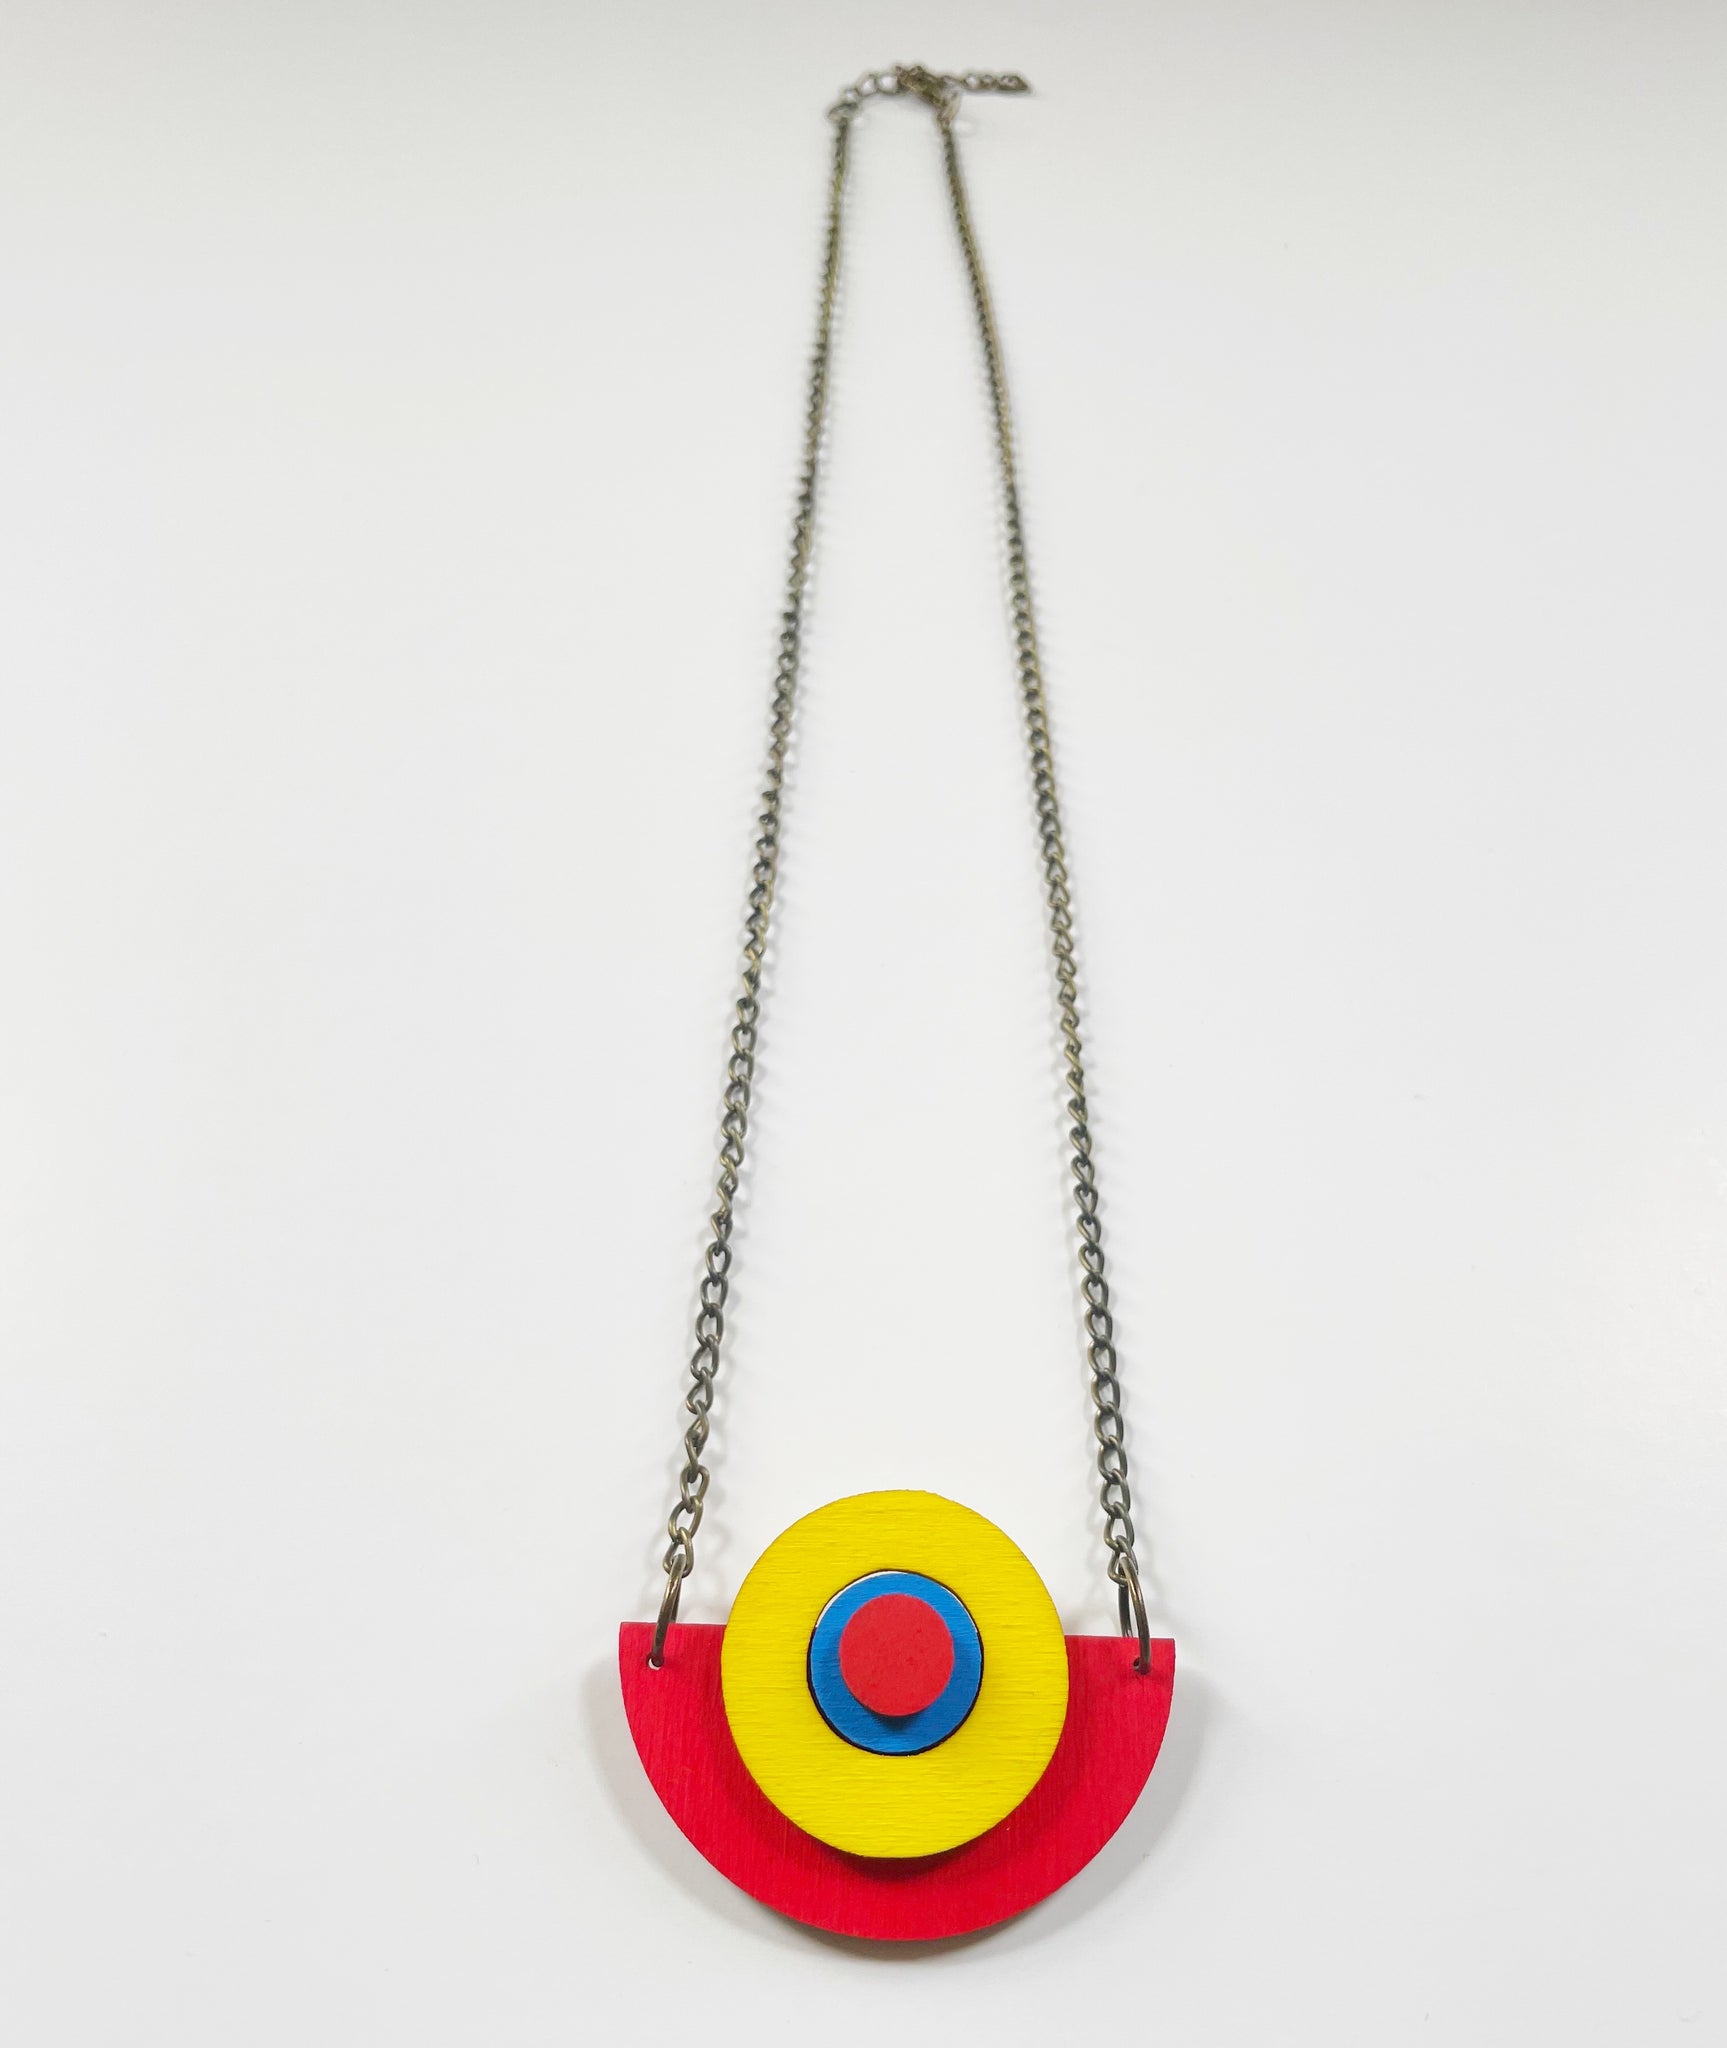 Luna red, blue & yellow necklace